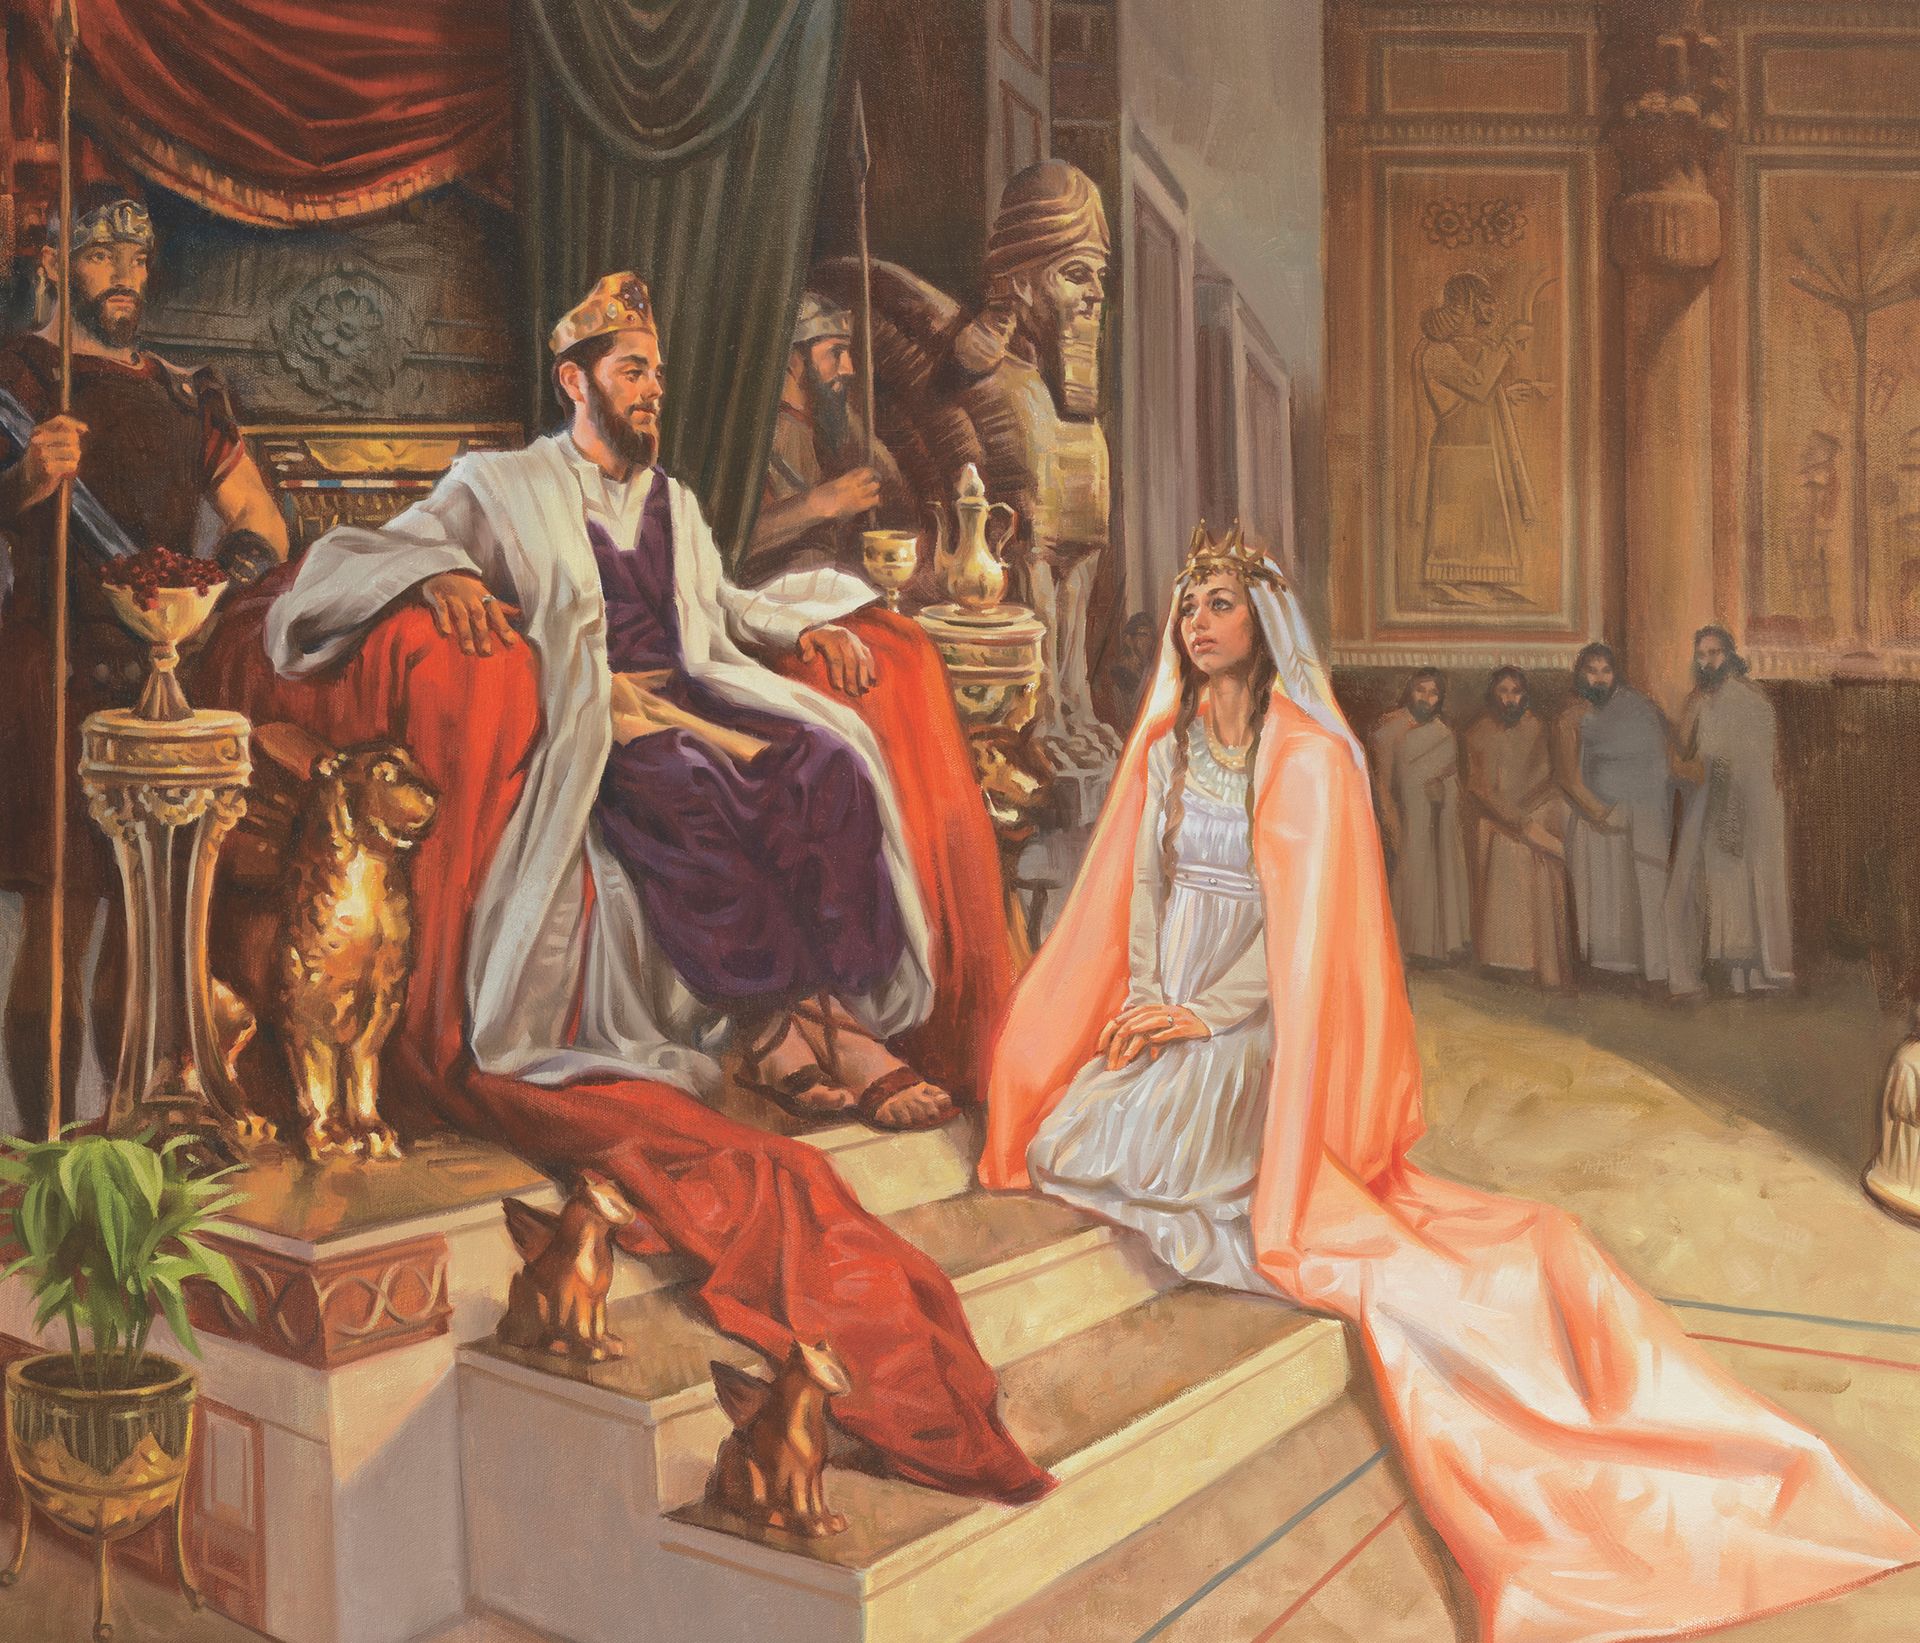 Queen Esther Saves Jehovah's People, by Sam Lawlor